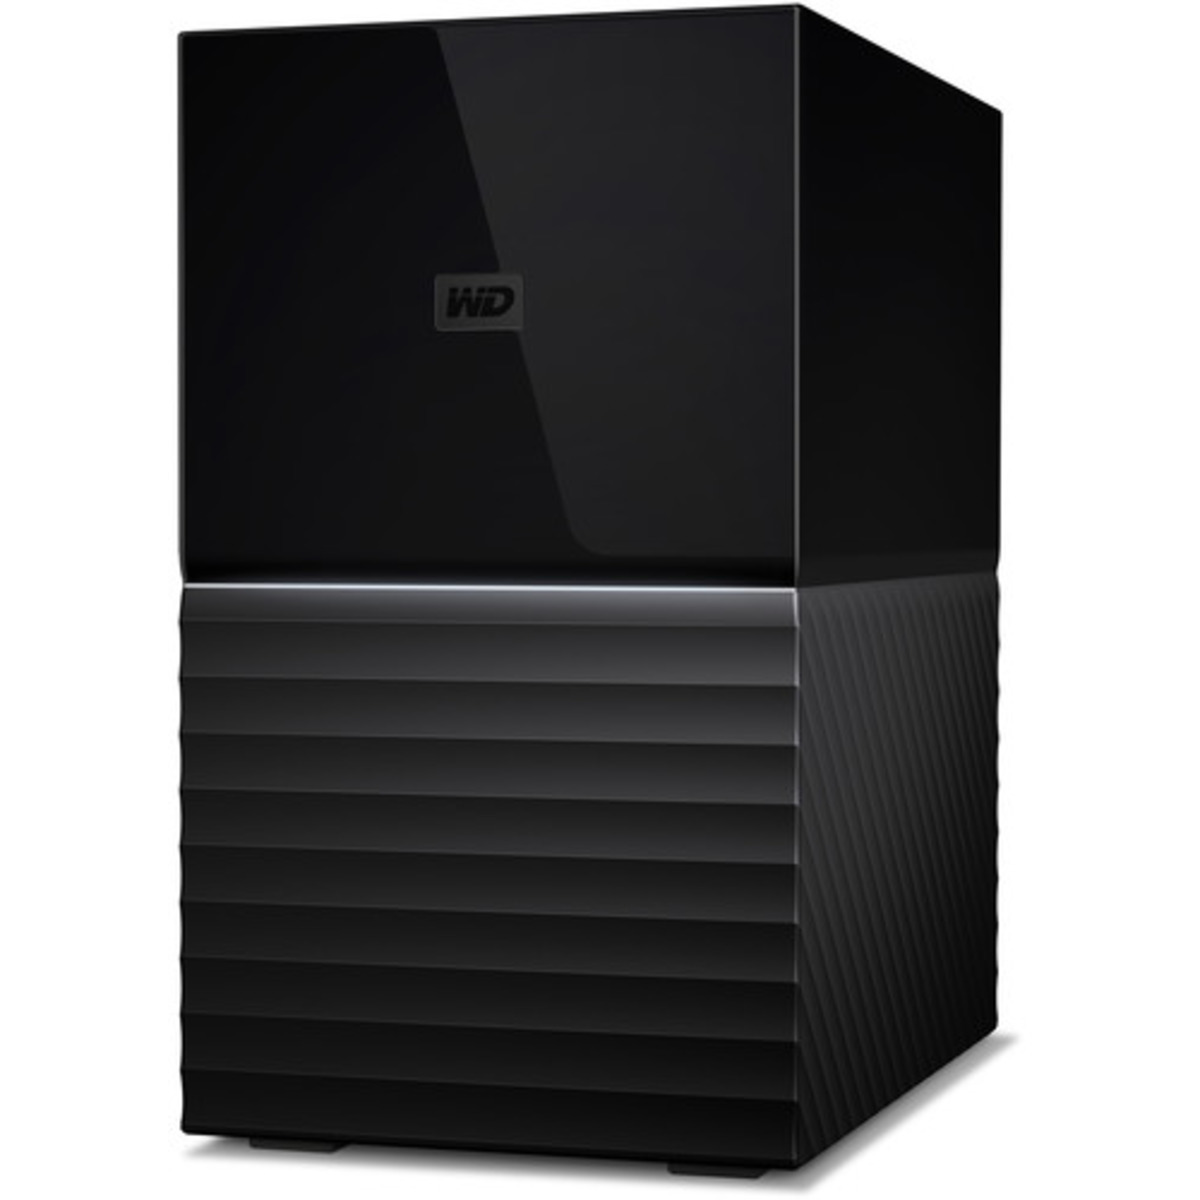 buy $800 Western Digital My Book DUO Gen 2 20tb Desktop DAS - Direct Attached Storage Device 2x10000gb Western Digital Red Plus WD101EFBX 3.5 7200rpm SATA 6Gb/s HDD NAS Class Drives Installed - Burn-In Tested - ON SALE - nas headquarters buy network attached storage server device das new raid-5 free shipping usa christmas new year holiday sale My Book DUO Gen 2